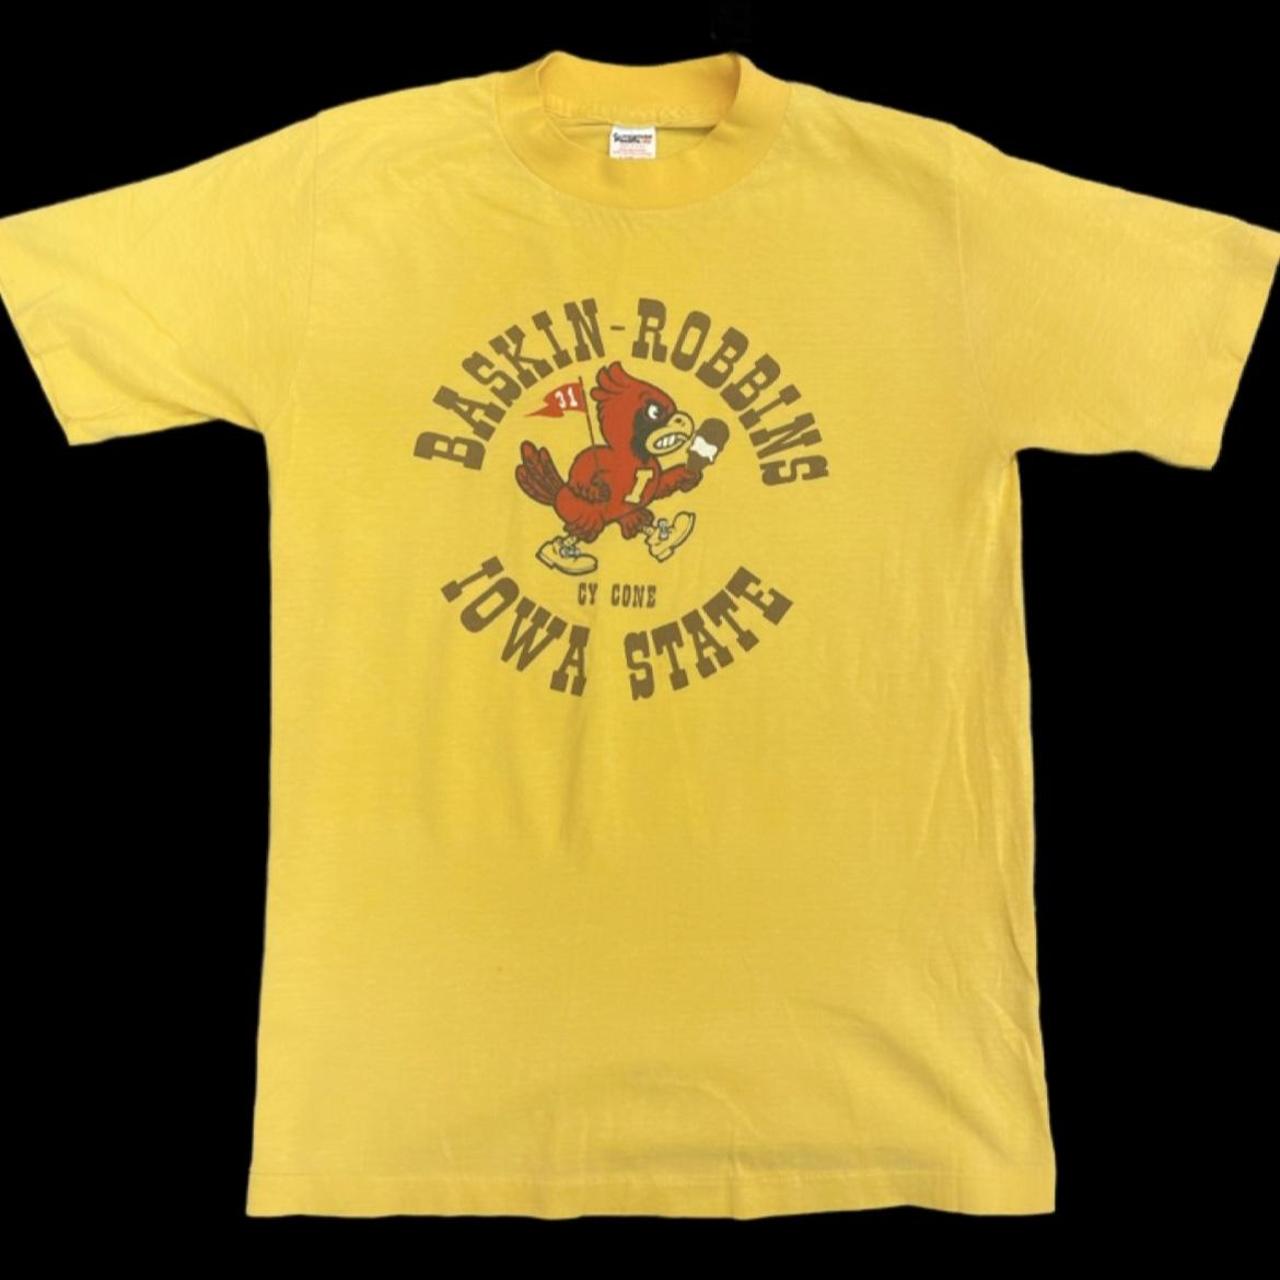 Ocean Pacific Men's Yellow and Red T-shirt